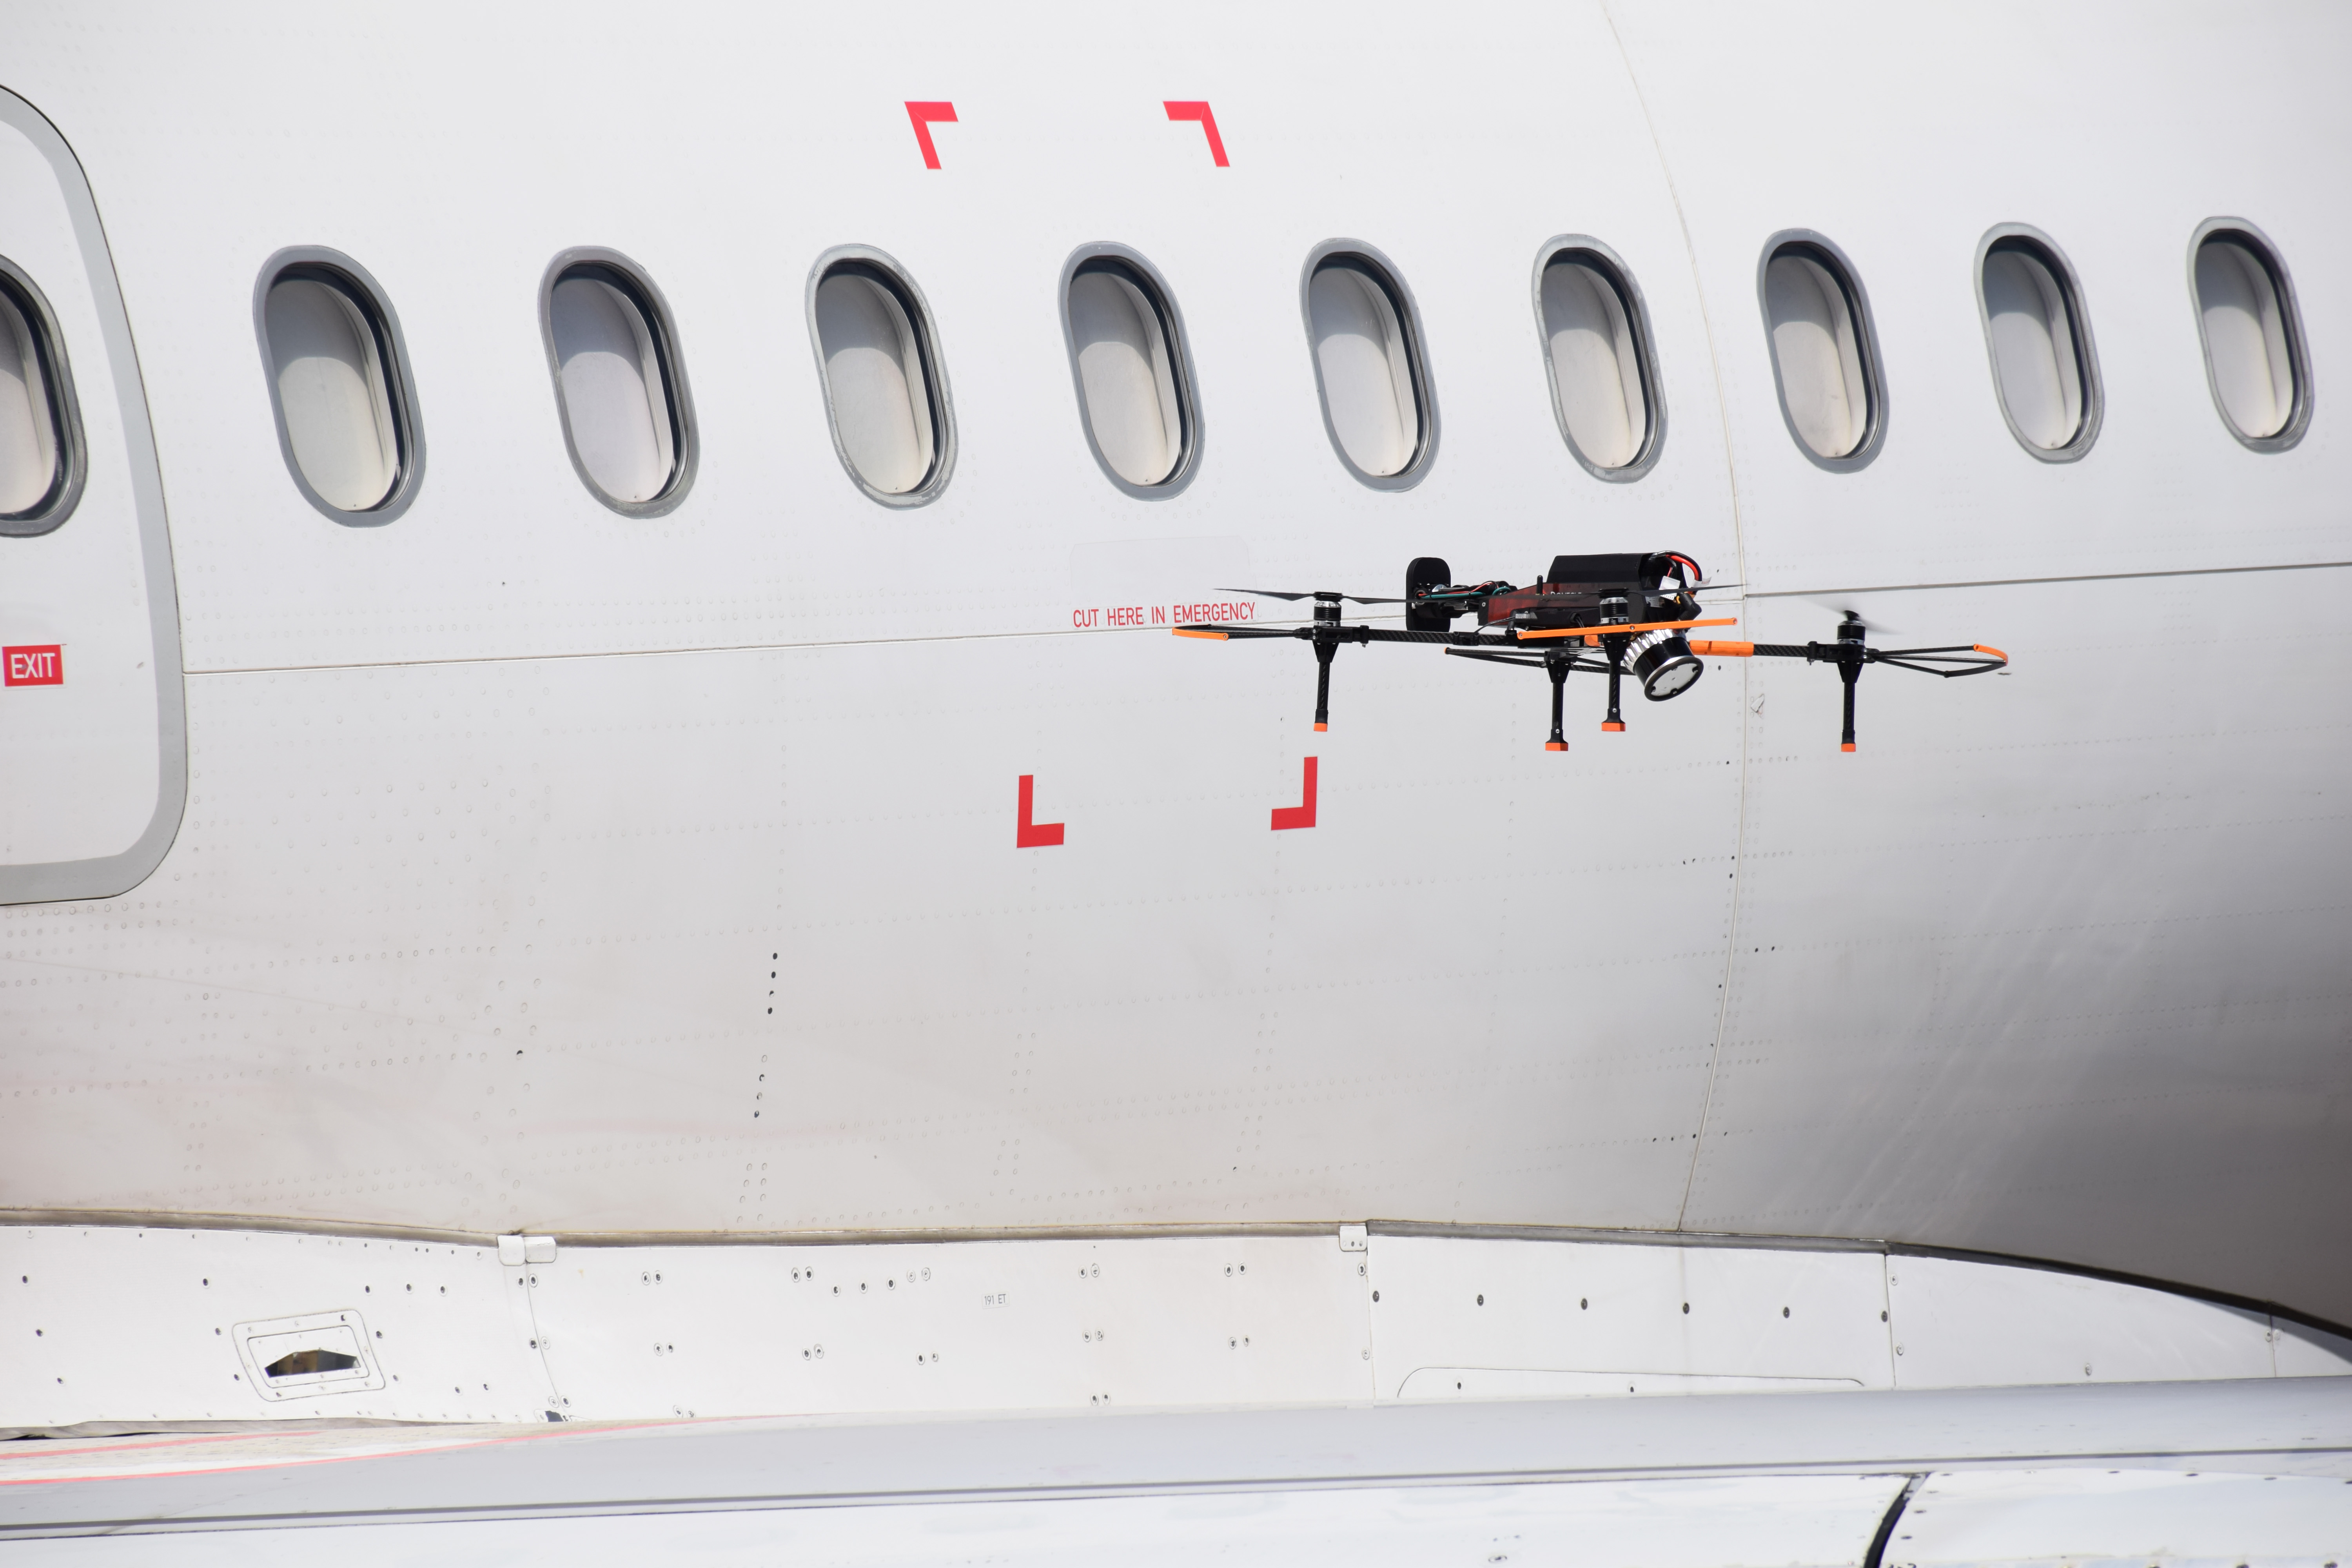 Tarmac aerosave and donecle sign a drone aircraft inspection agreement